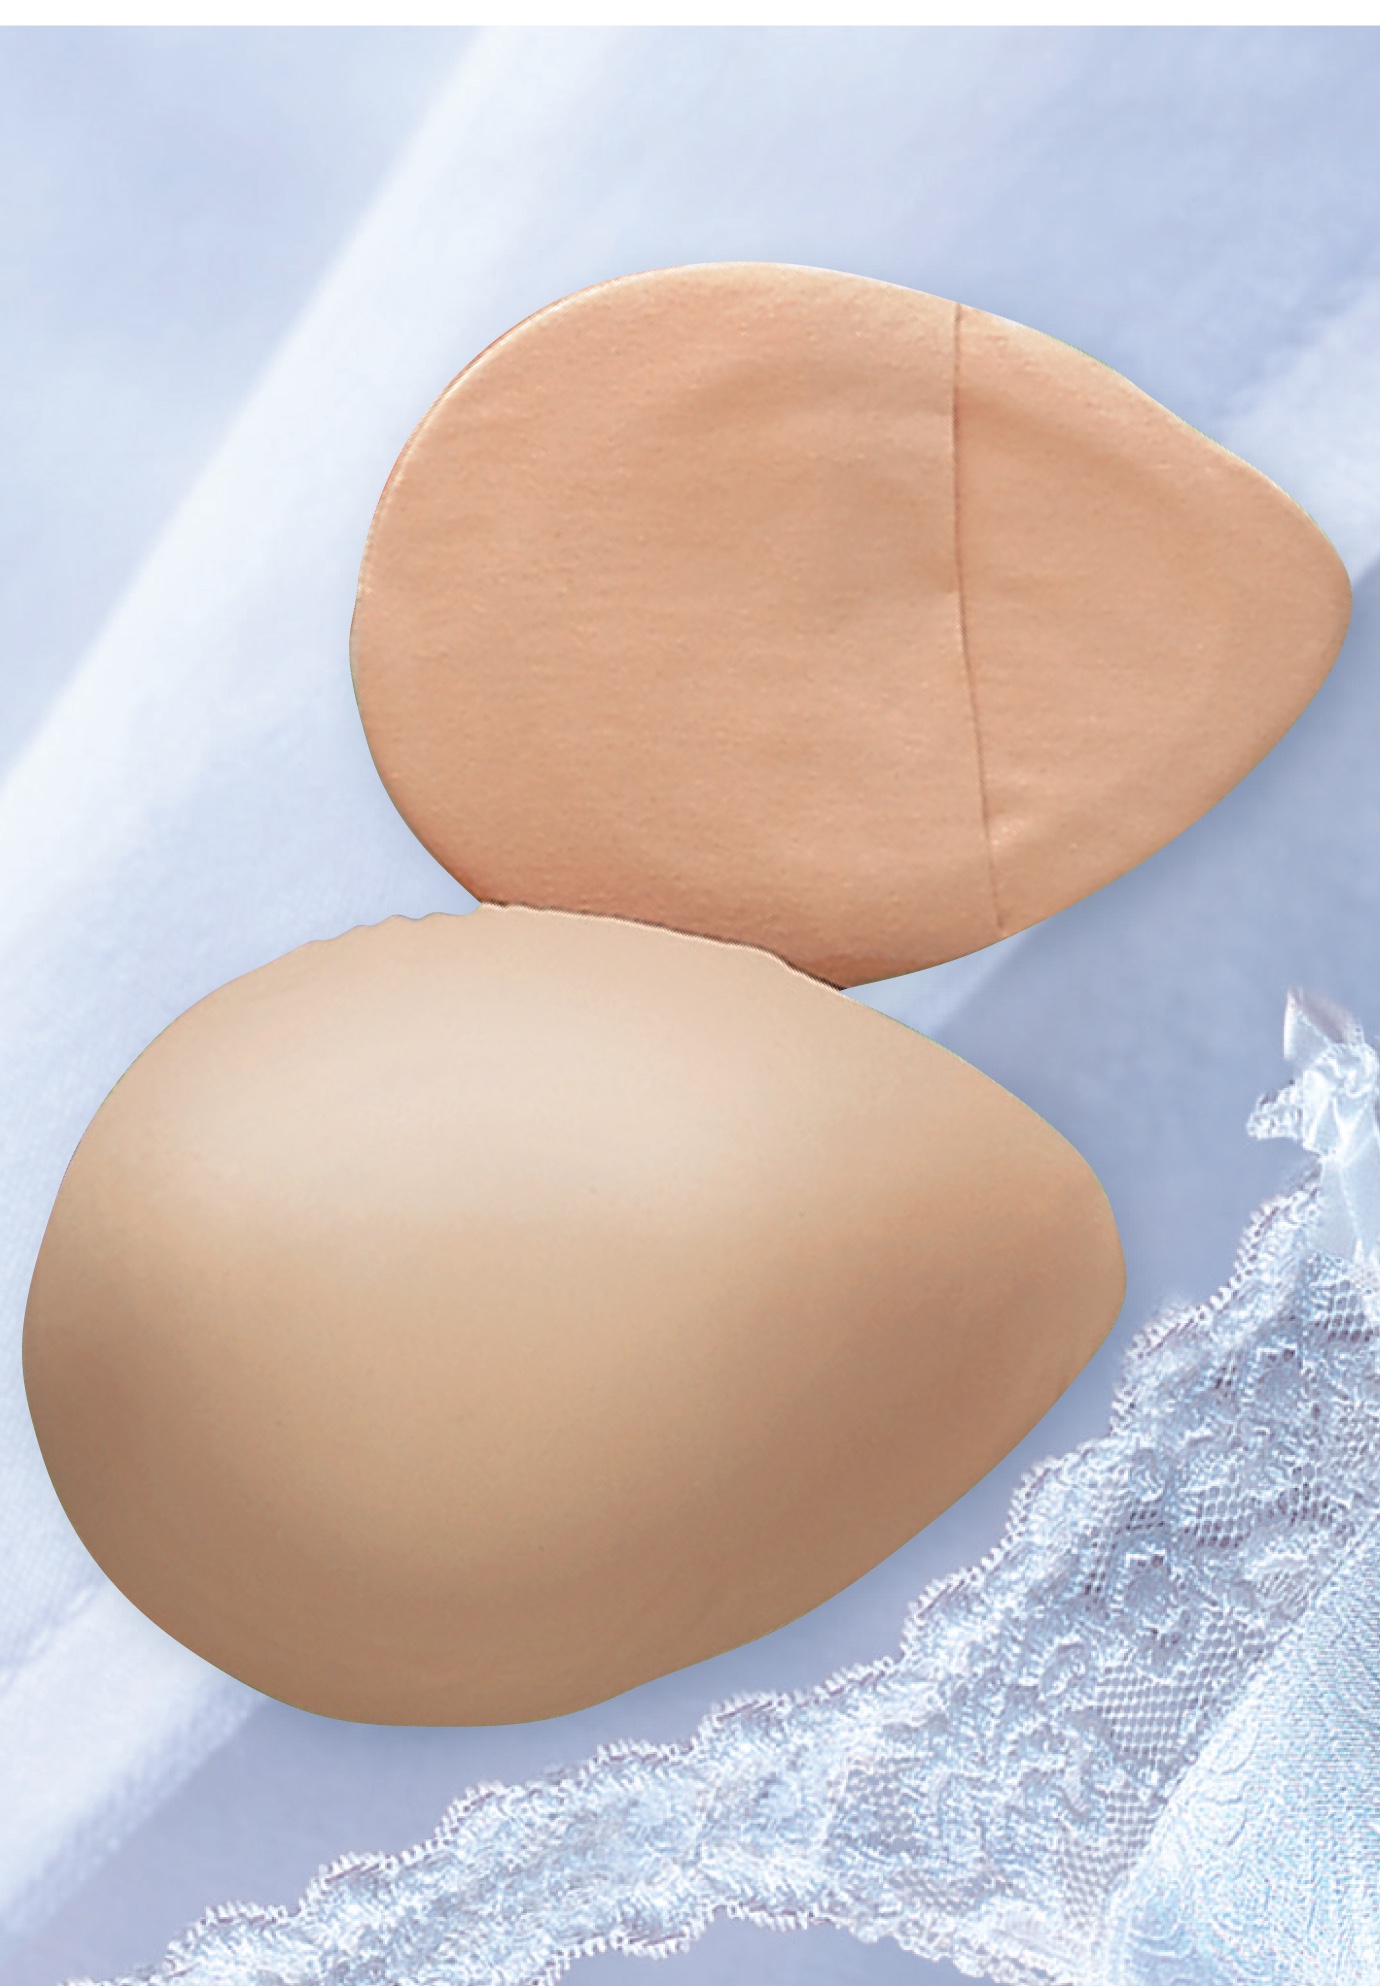 How To Use Breast Forms